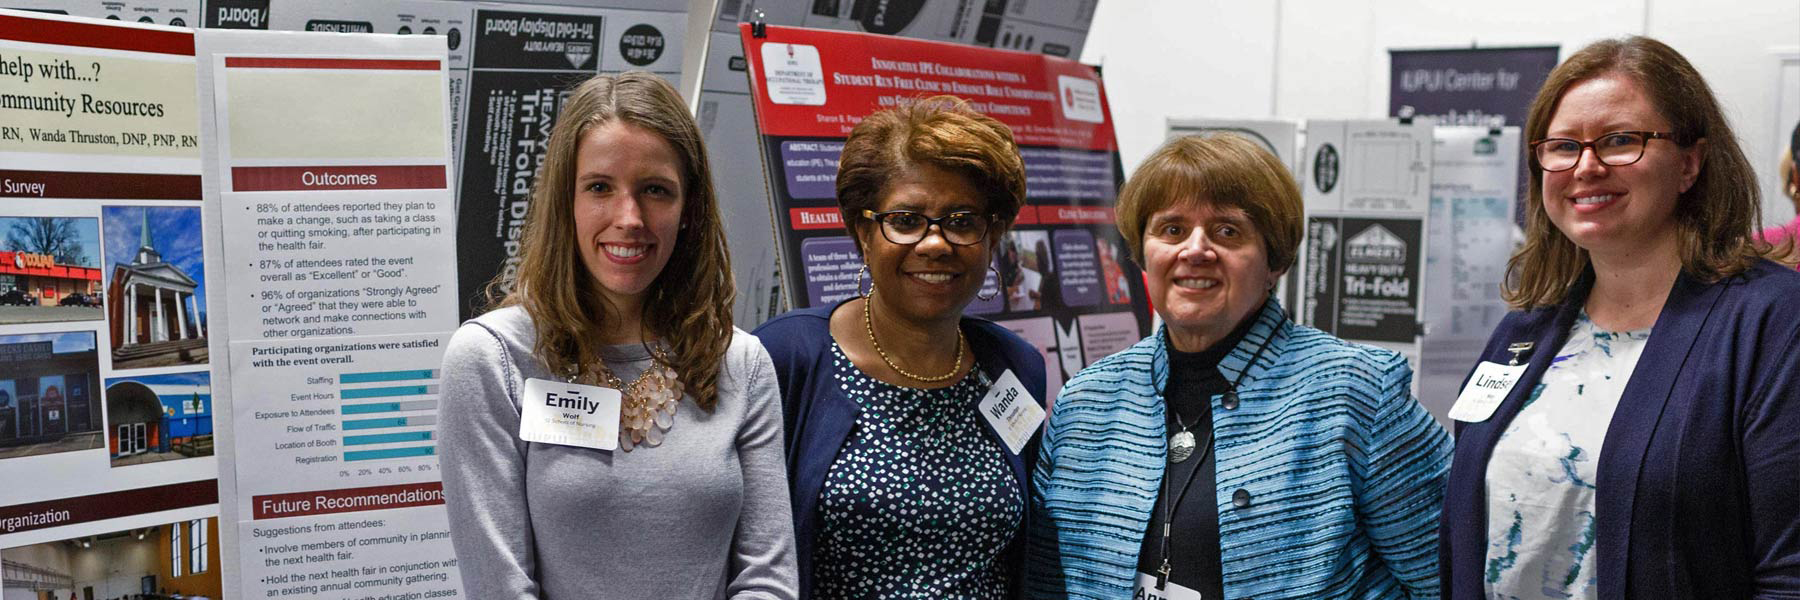 Four women stand smiling in front of research posters.